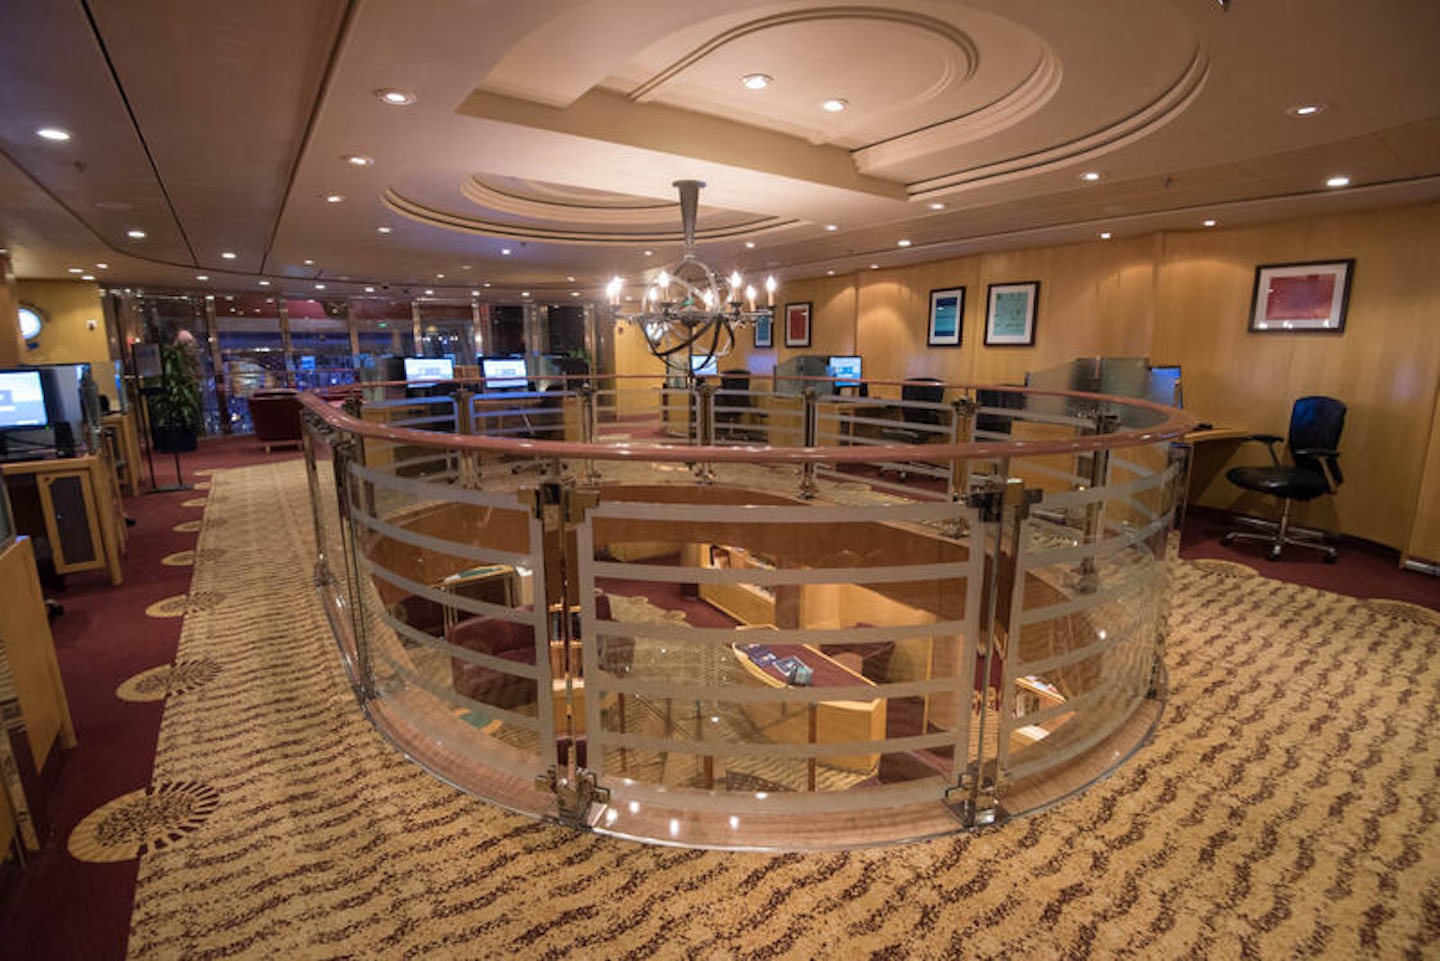 Royal Caribbean Online Internet Cafe on Freedom of the Seas